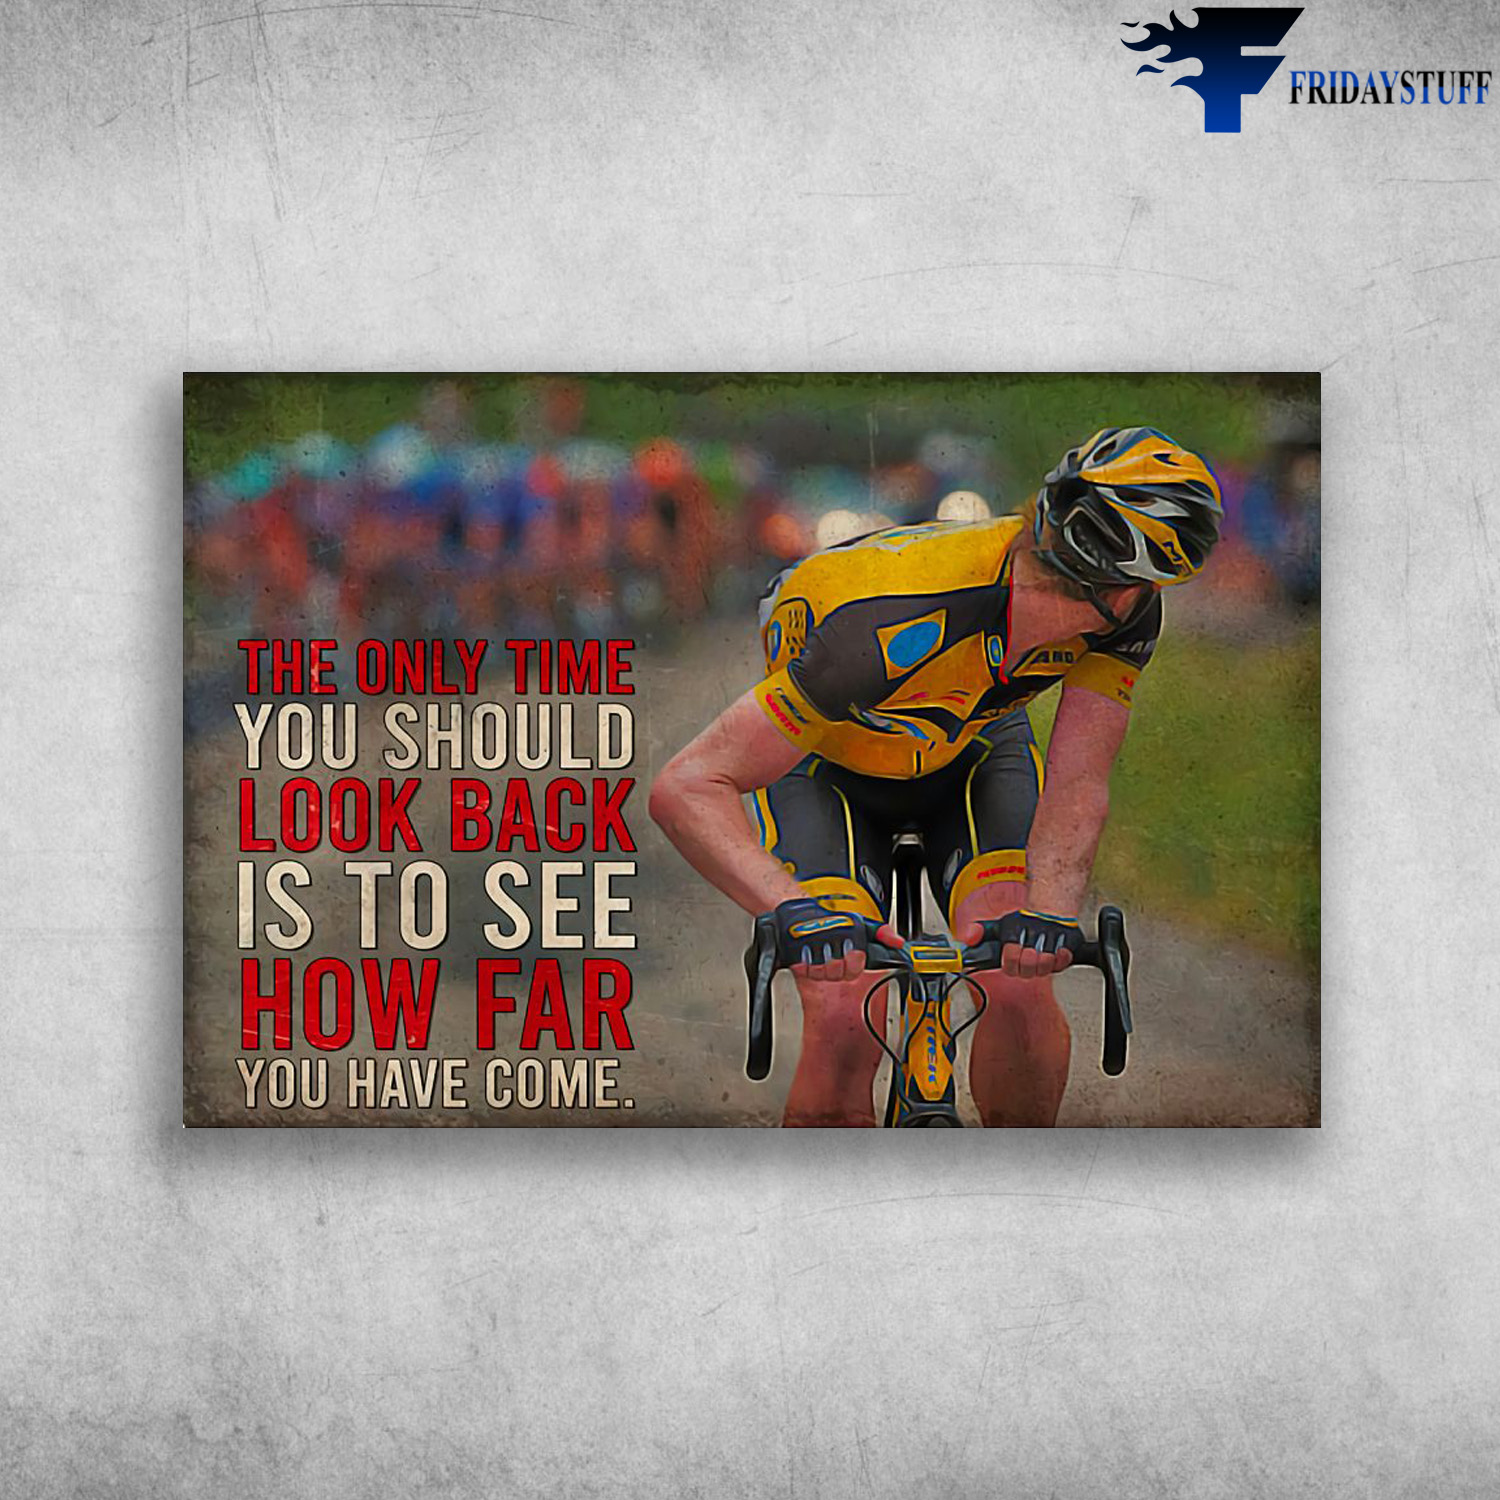 Man Cycling - The Only TIme You Should Look Back Is To See, How Far You Have Come